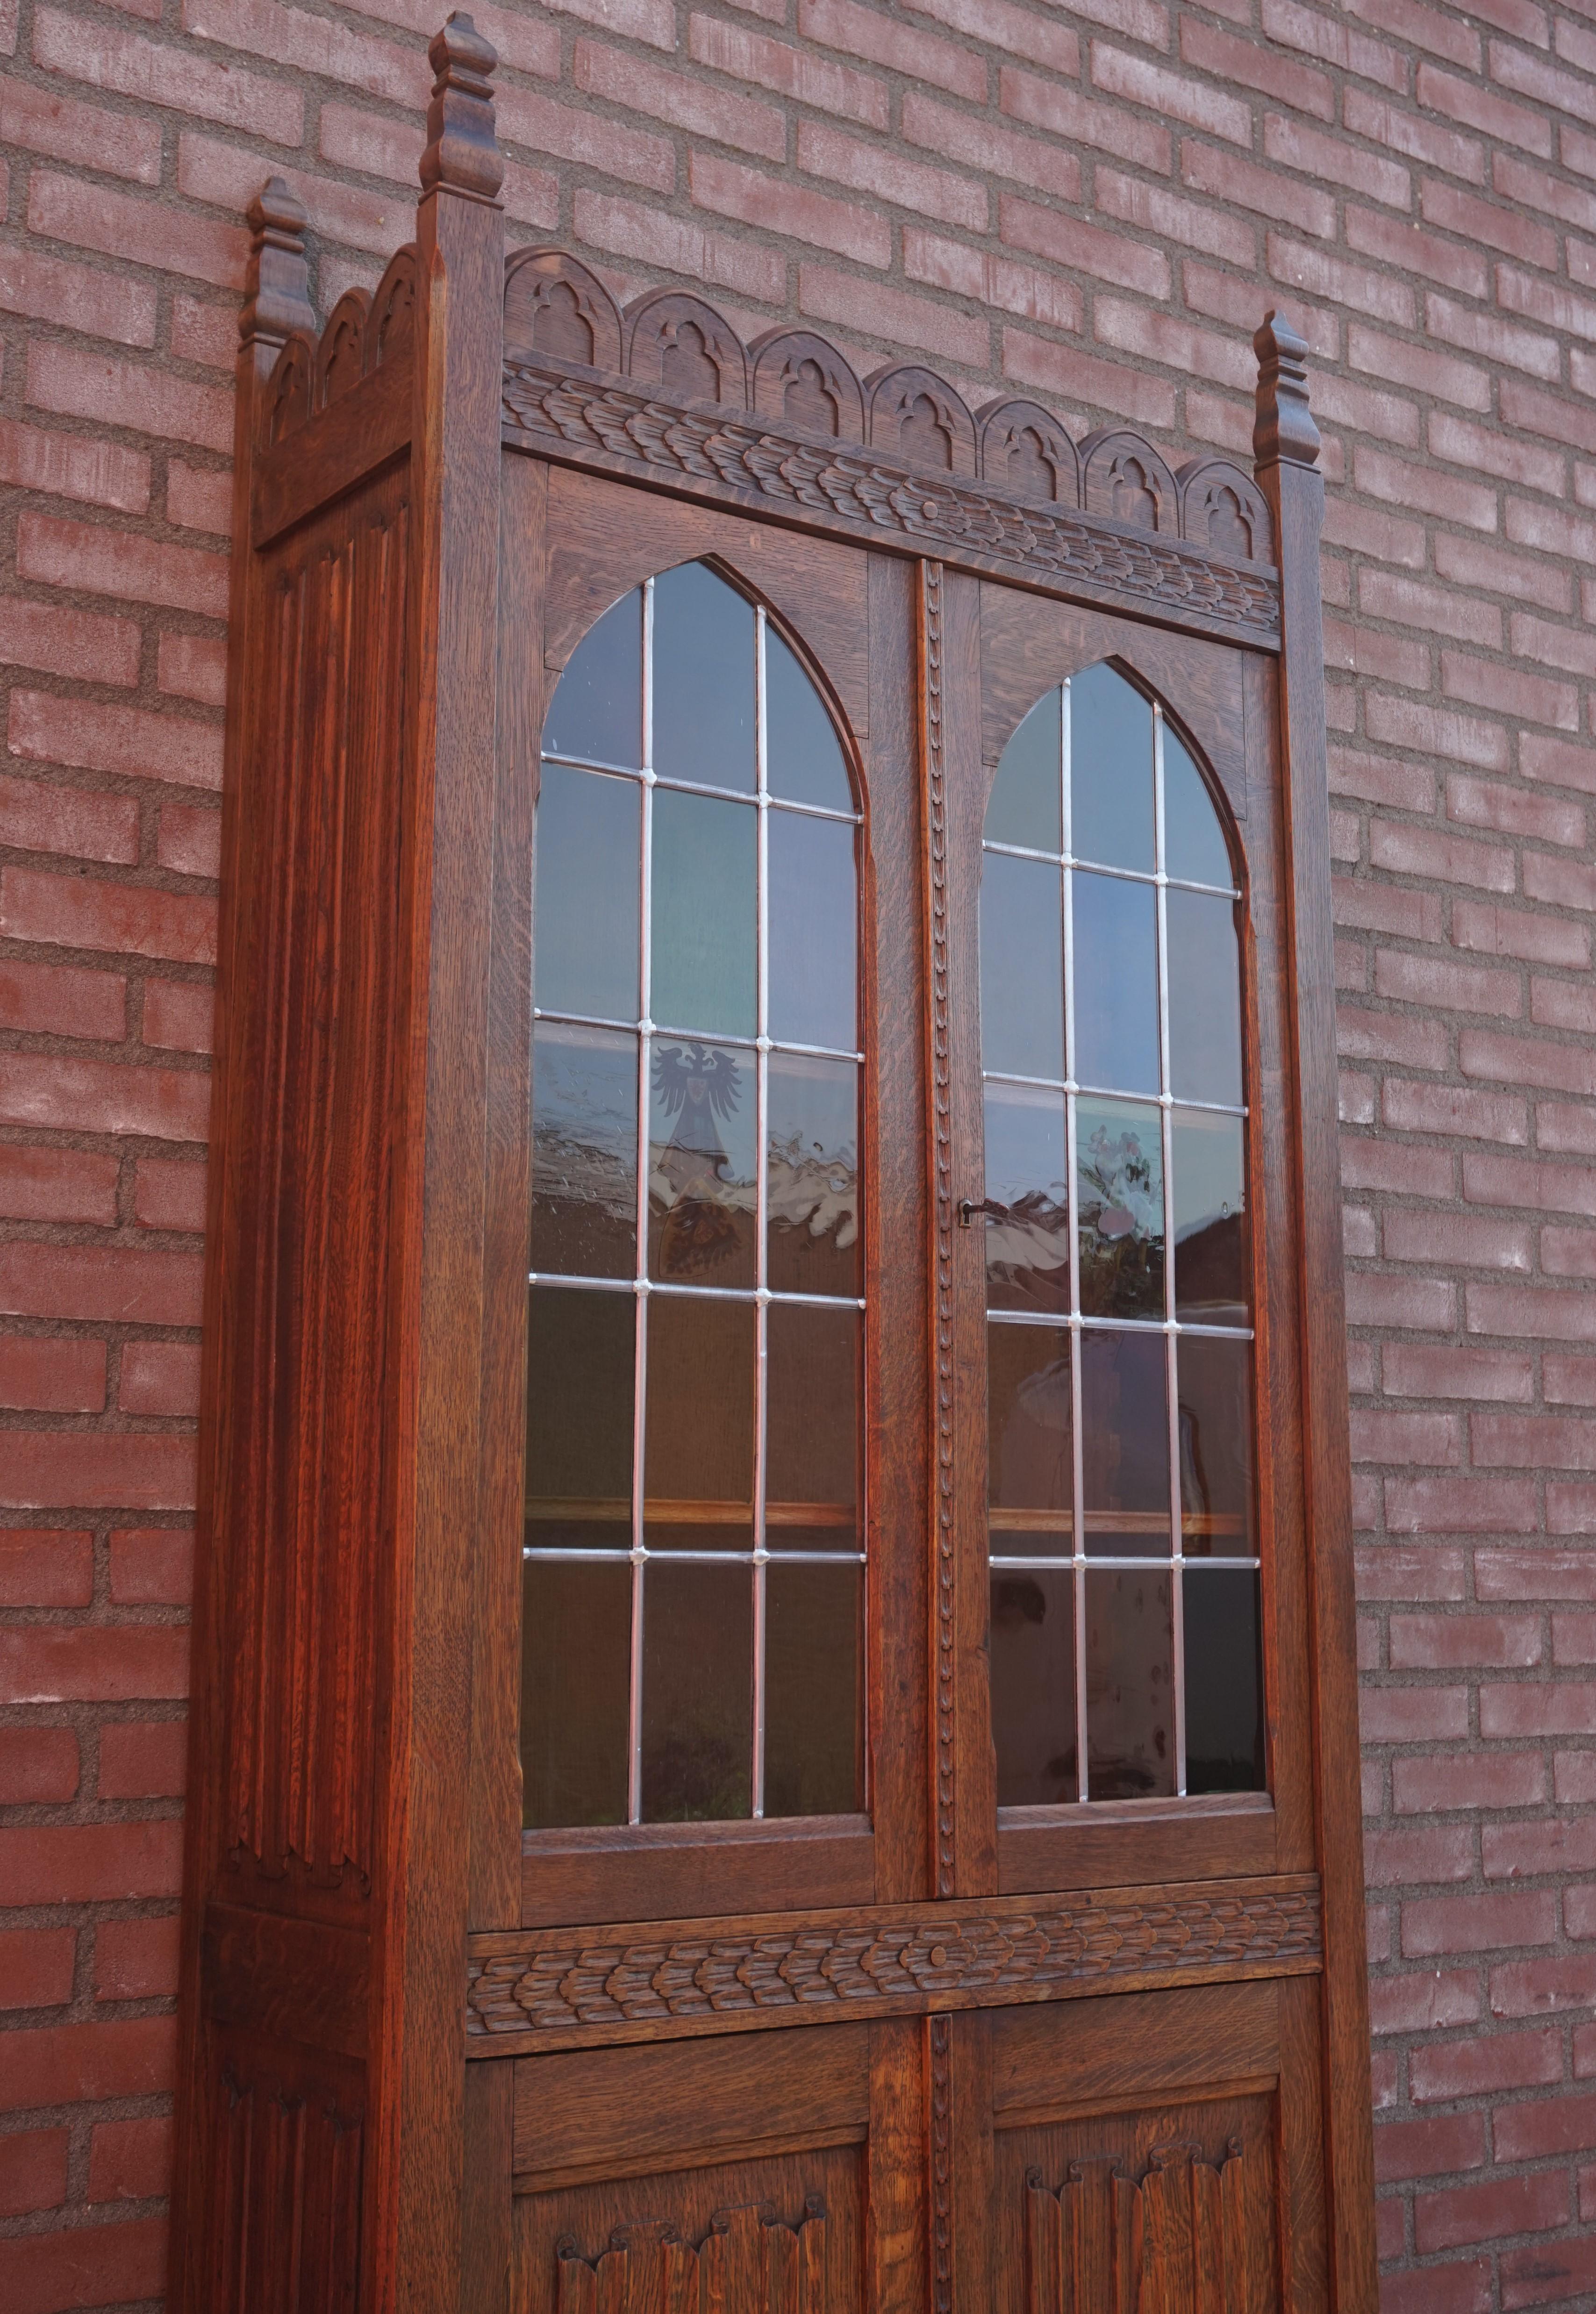 European Early 1900s Gothic Revival Tall Bookcase/ Cabinet with Stained Glass Windows